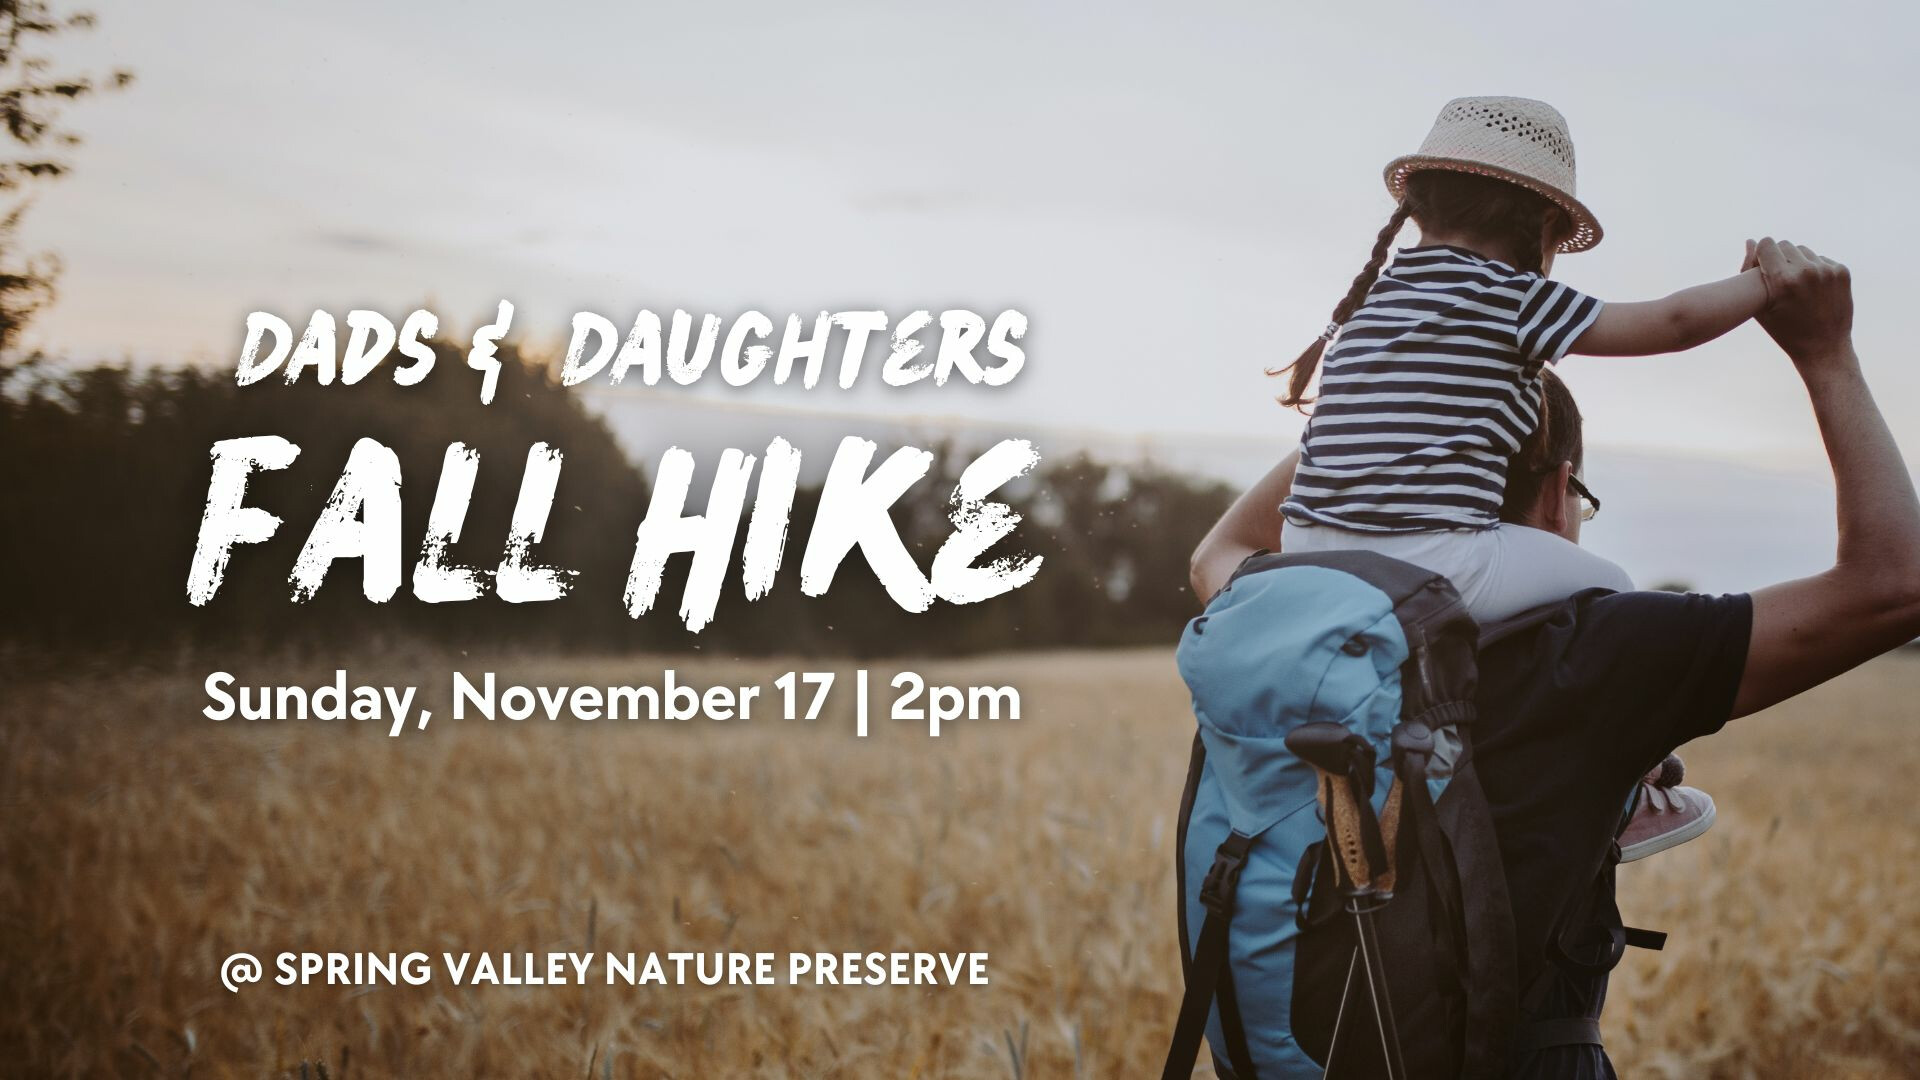 Dads & Daughters Fall Hike